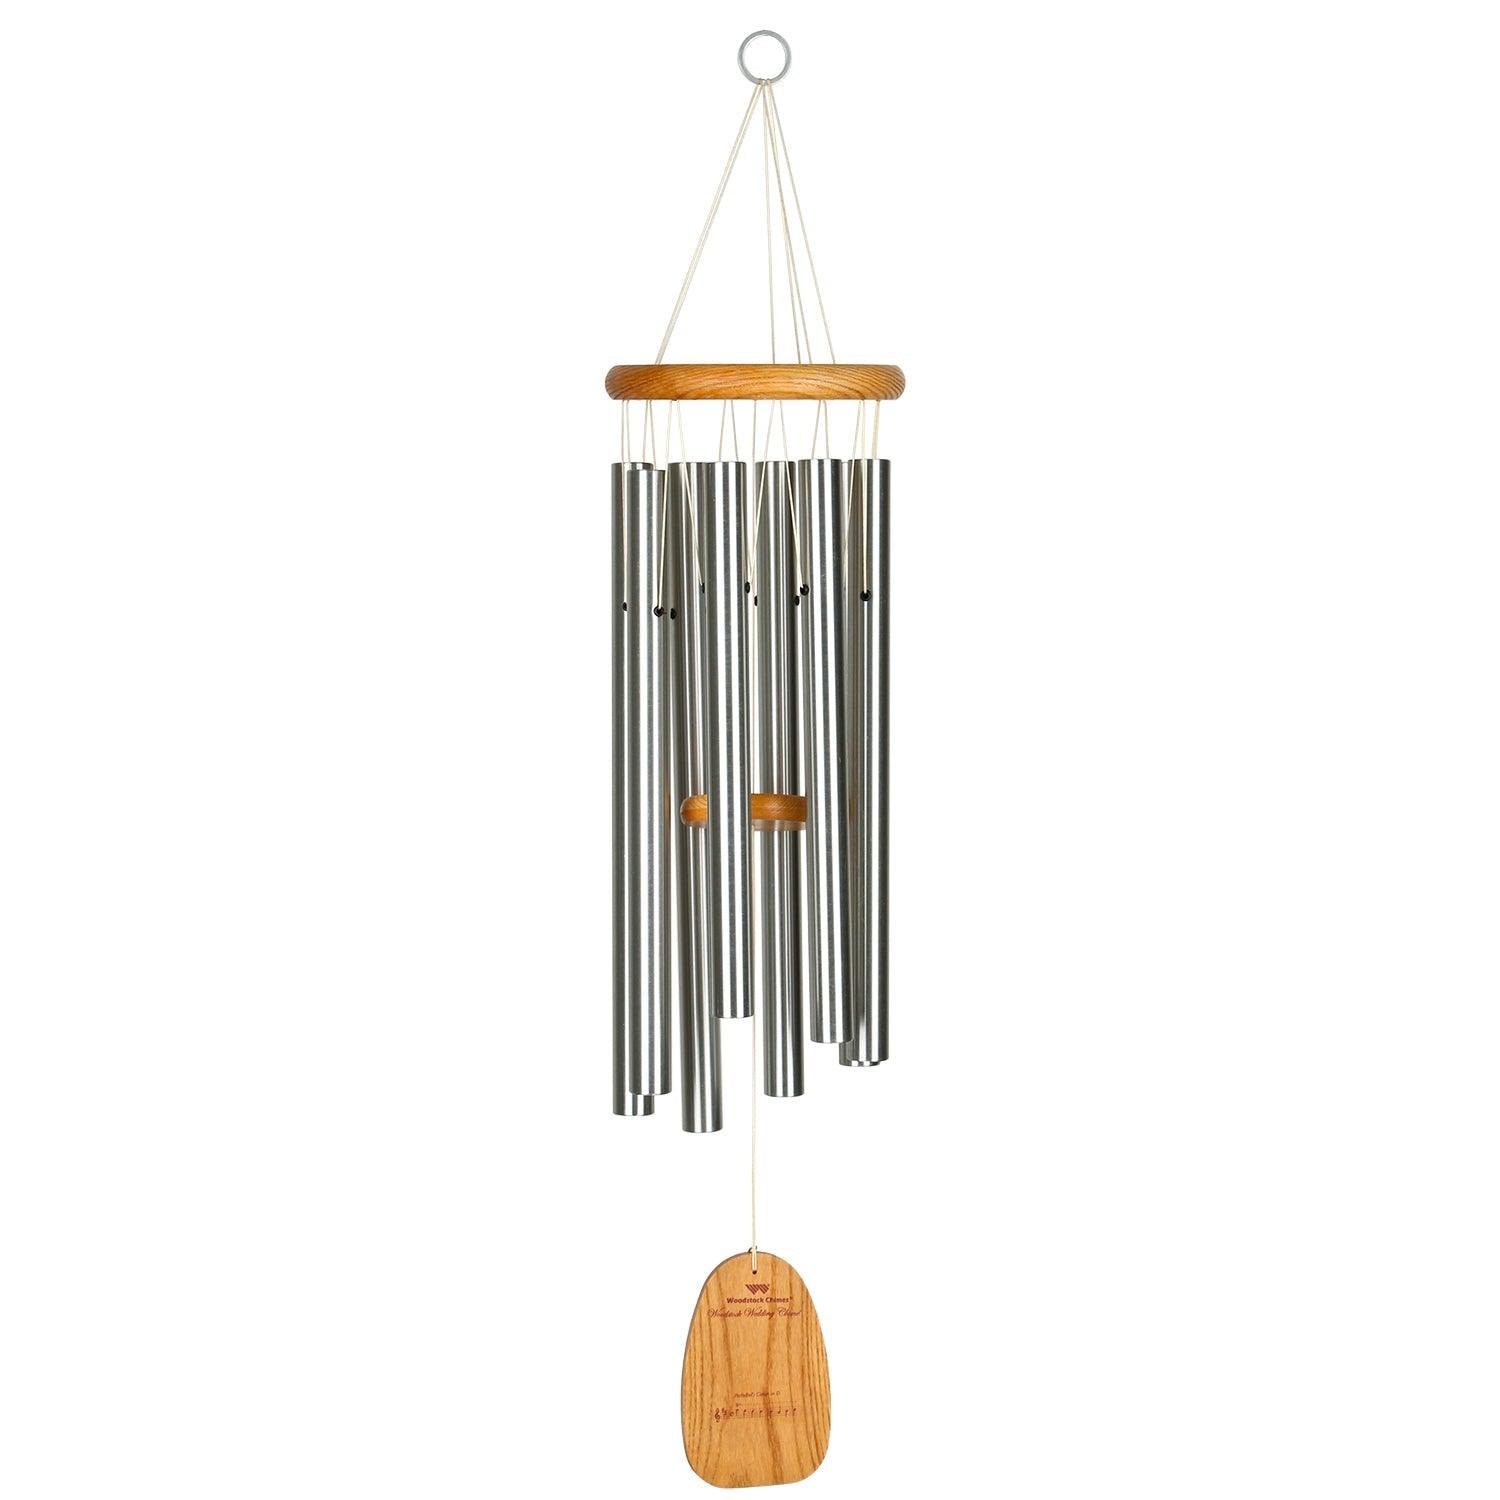 Create a beautiful, harmonious ambiance on your special day with timeless and elegant notes. This wind chime is crafted from high-quality cherry finish ash wood and features eight silver aluminum tubes, producing rich and resonant tones. Measuring at 34 inches in length and 7 inches in diameter, it's the perfect size to fit in any outdoor space.